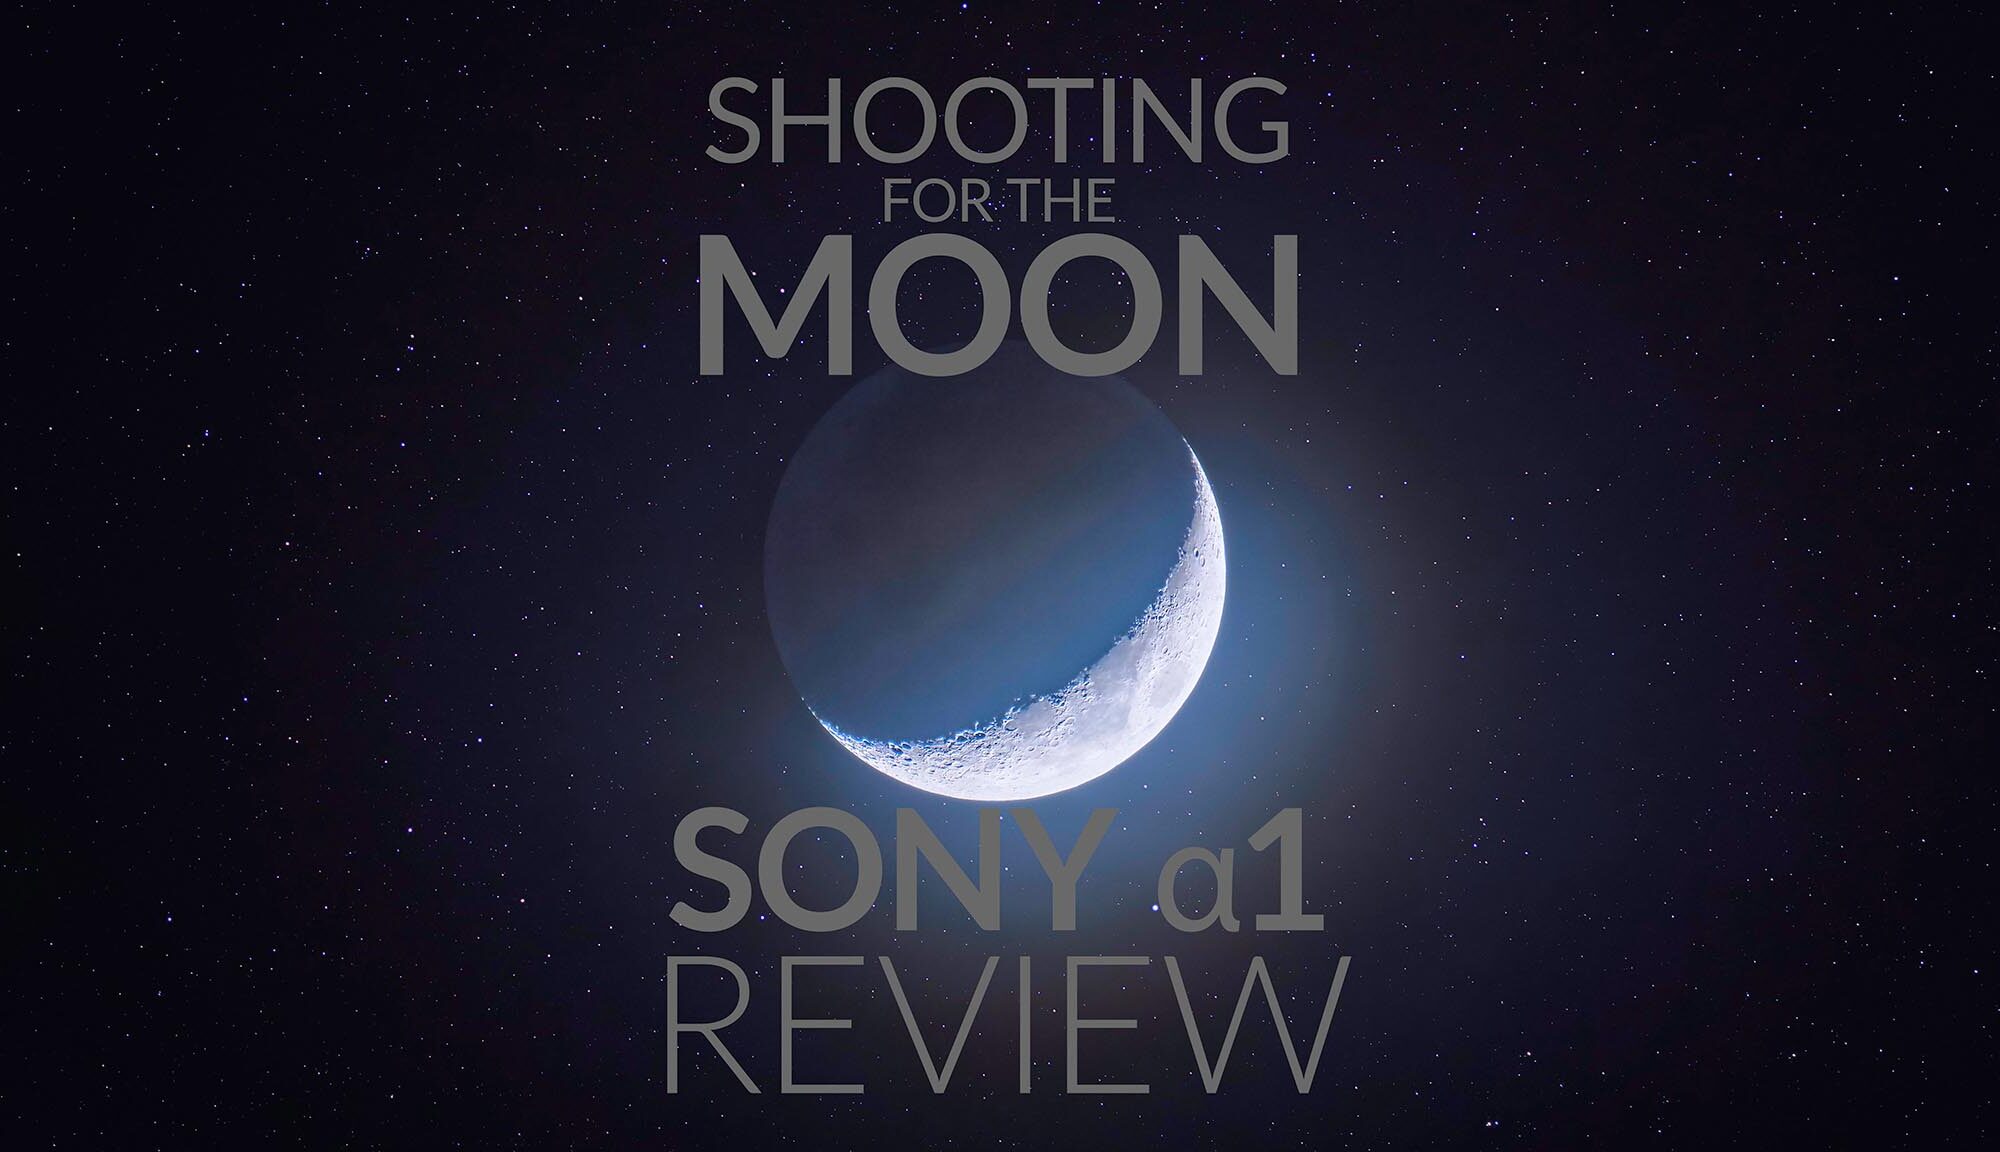 Shooting for the Moon with the Sony a1